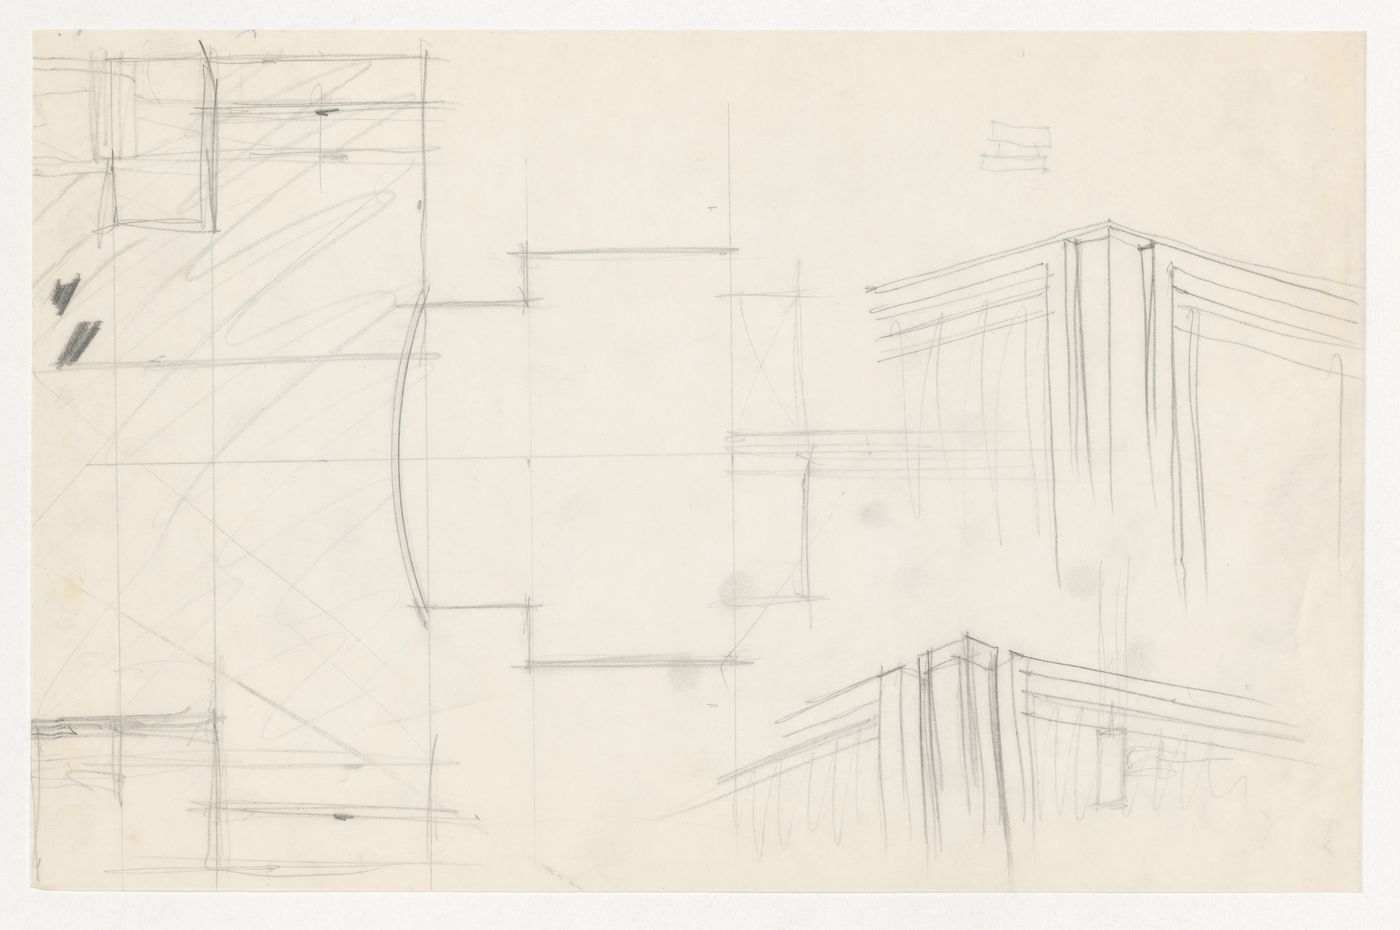 Perspective sketches showing window mullions, cornice and column connection at corners and an unidentified sketch for the Metallurgy Building, Illinois Institute of Technology, Chicago, with a small sketch elevation for brick coursing